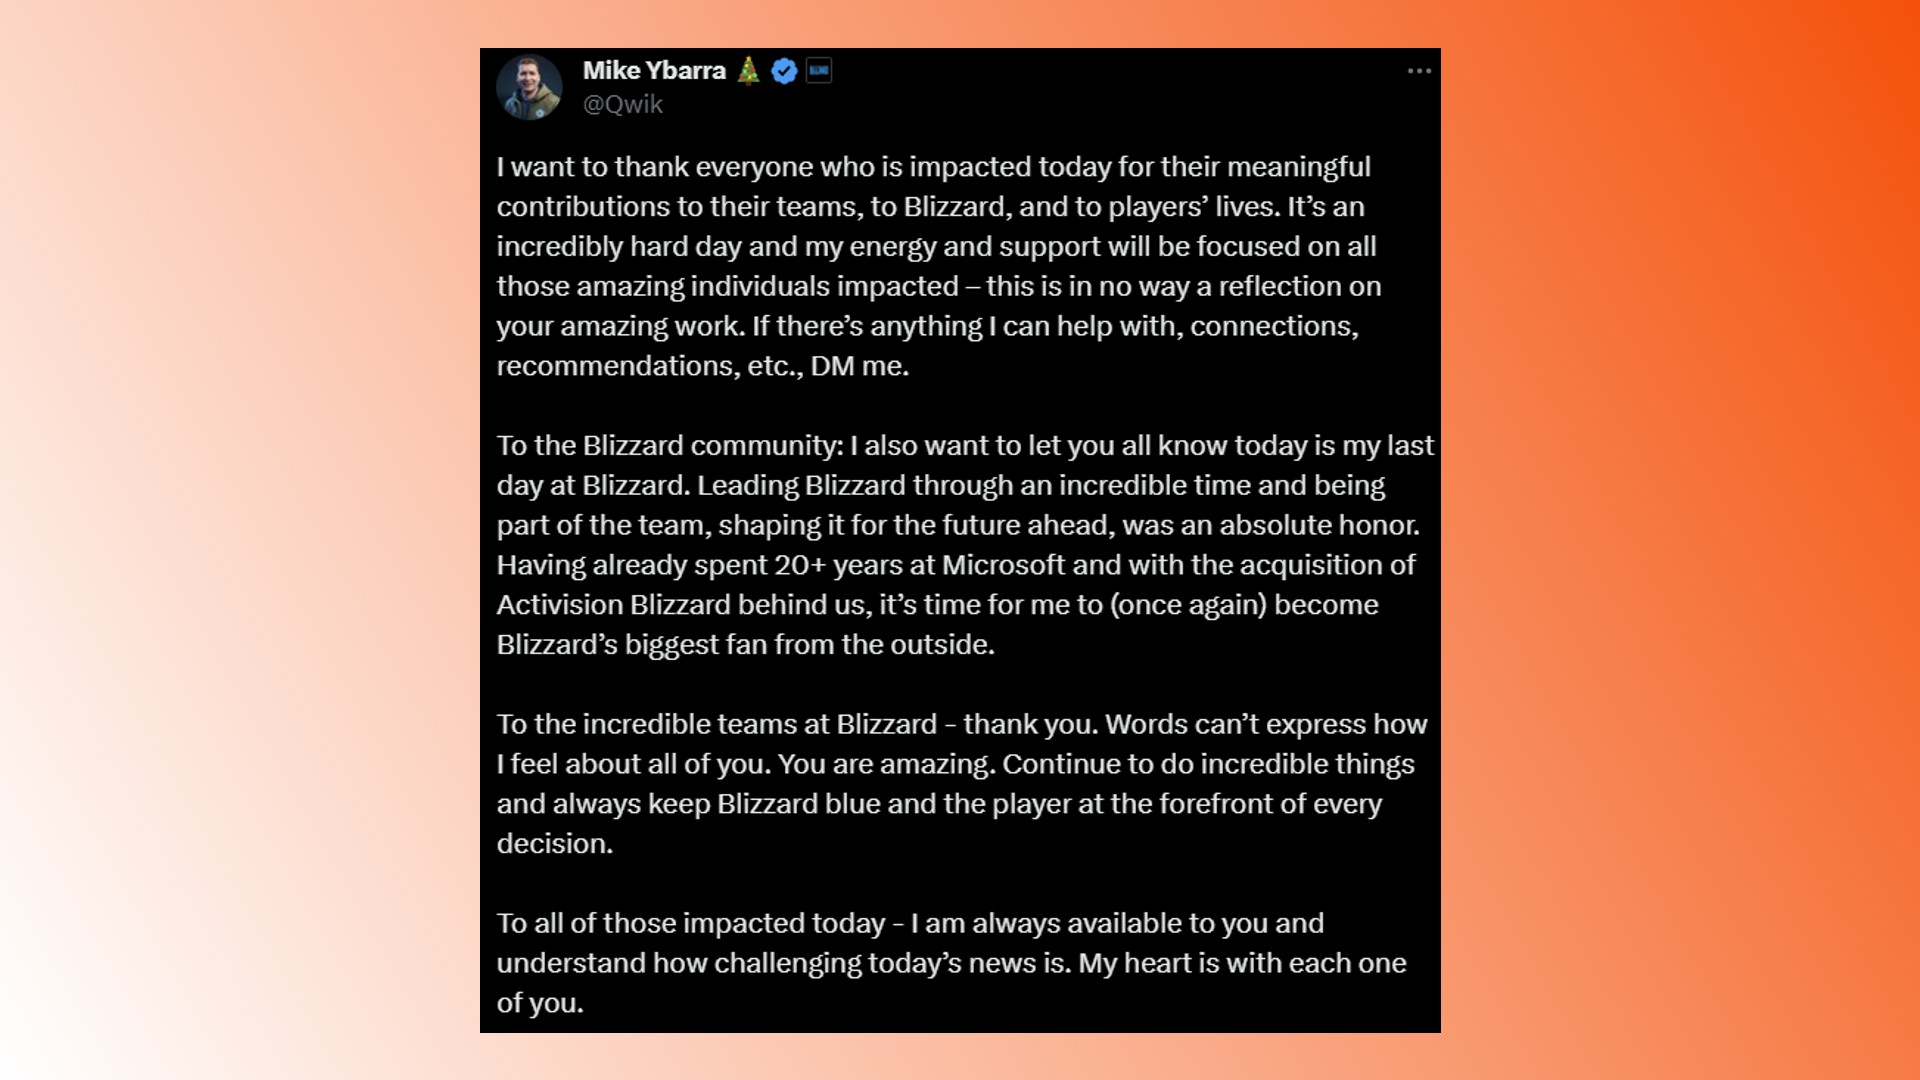 Blizzard survival game canceled: A statement from former Blizzard president Mike Ybarra